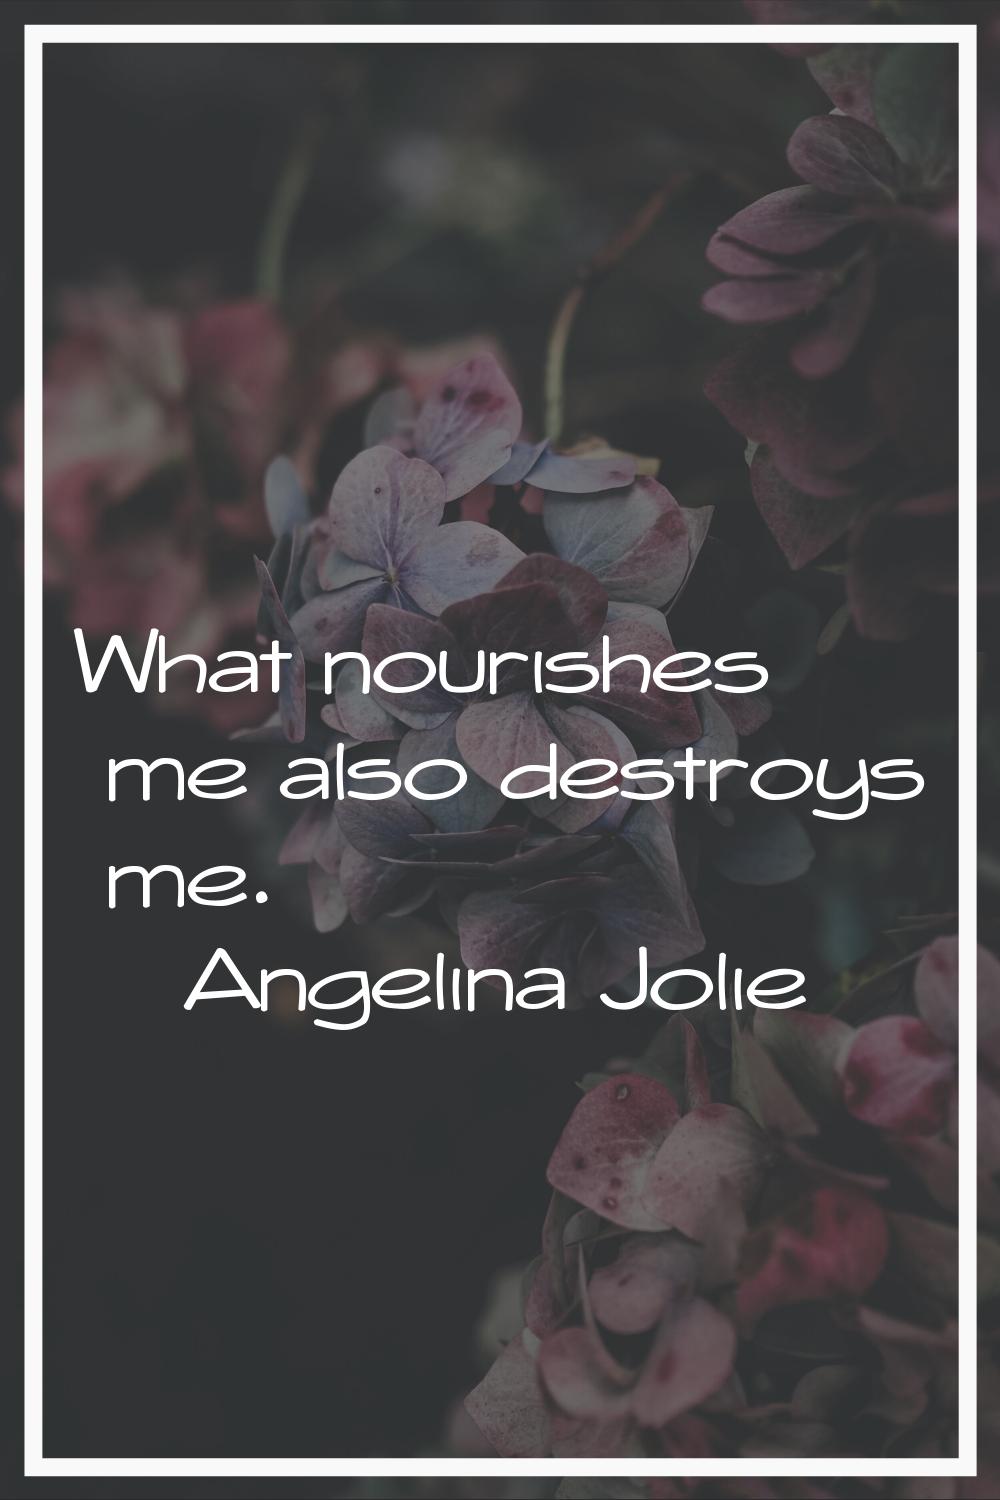 What nourishes me also destroys me.